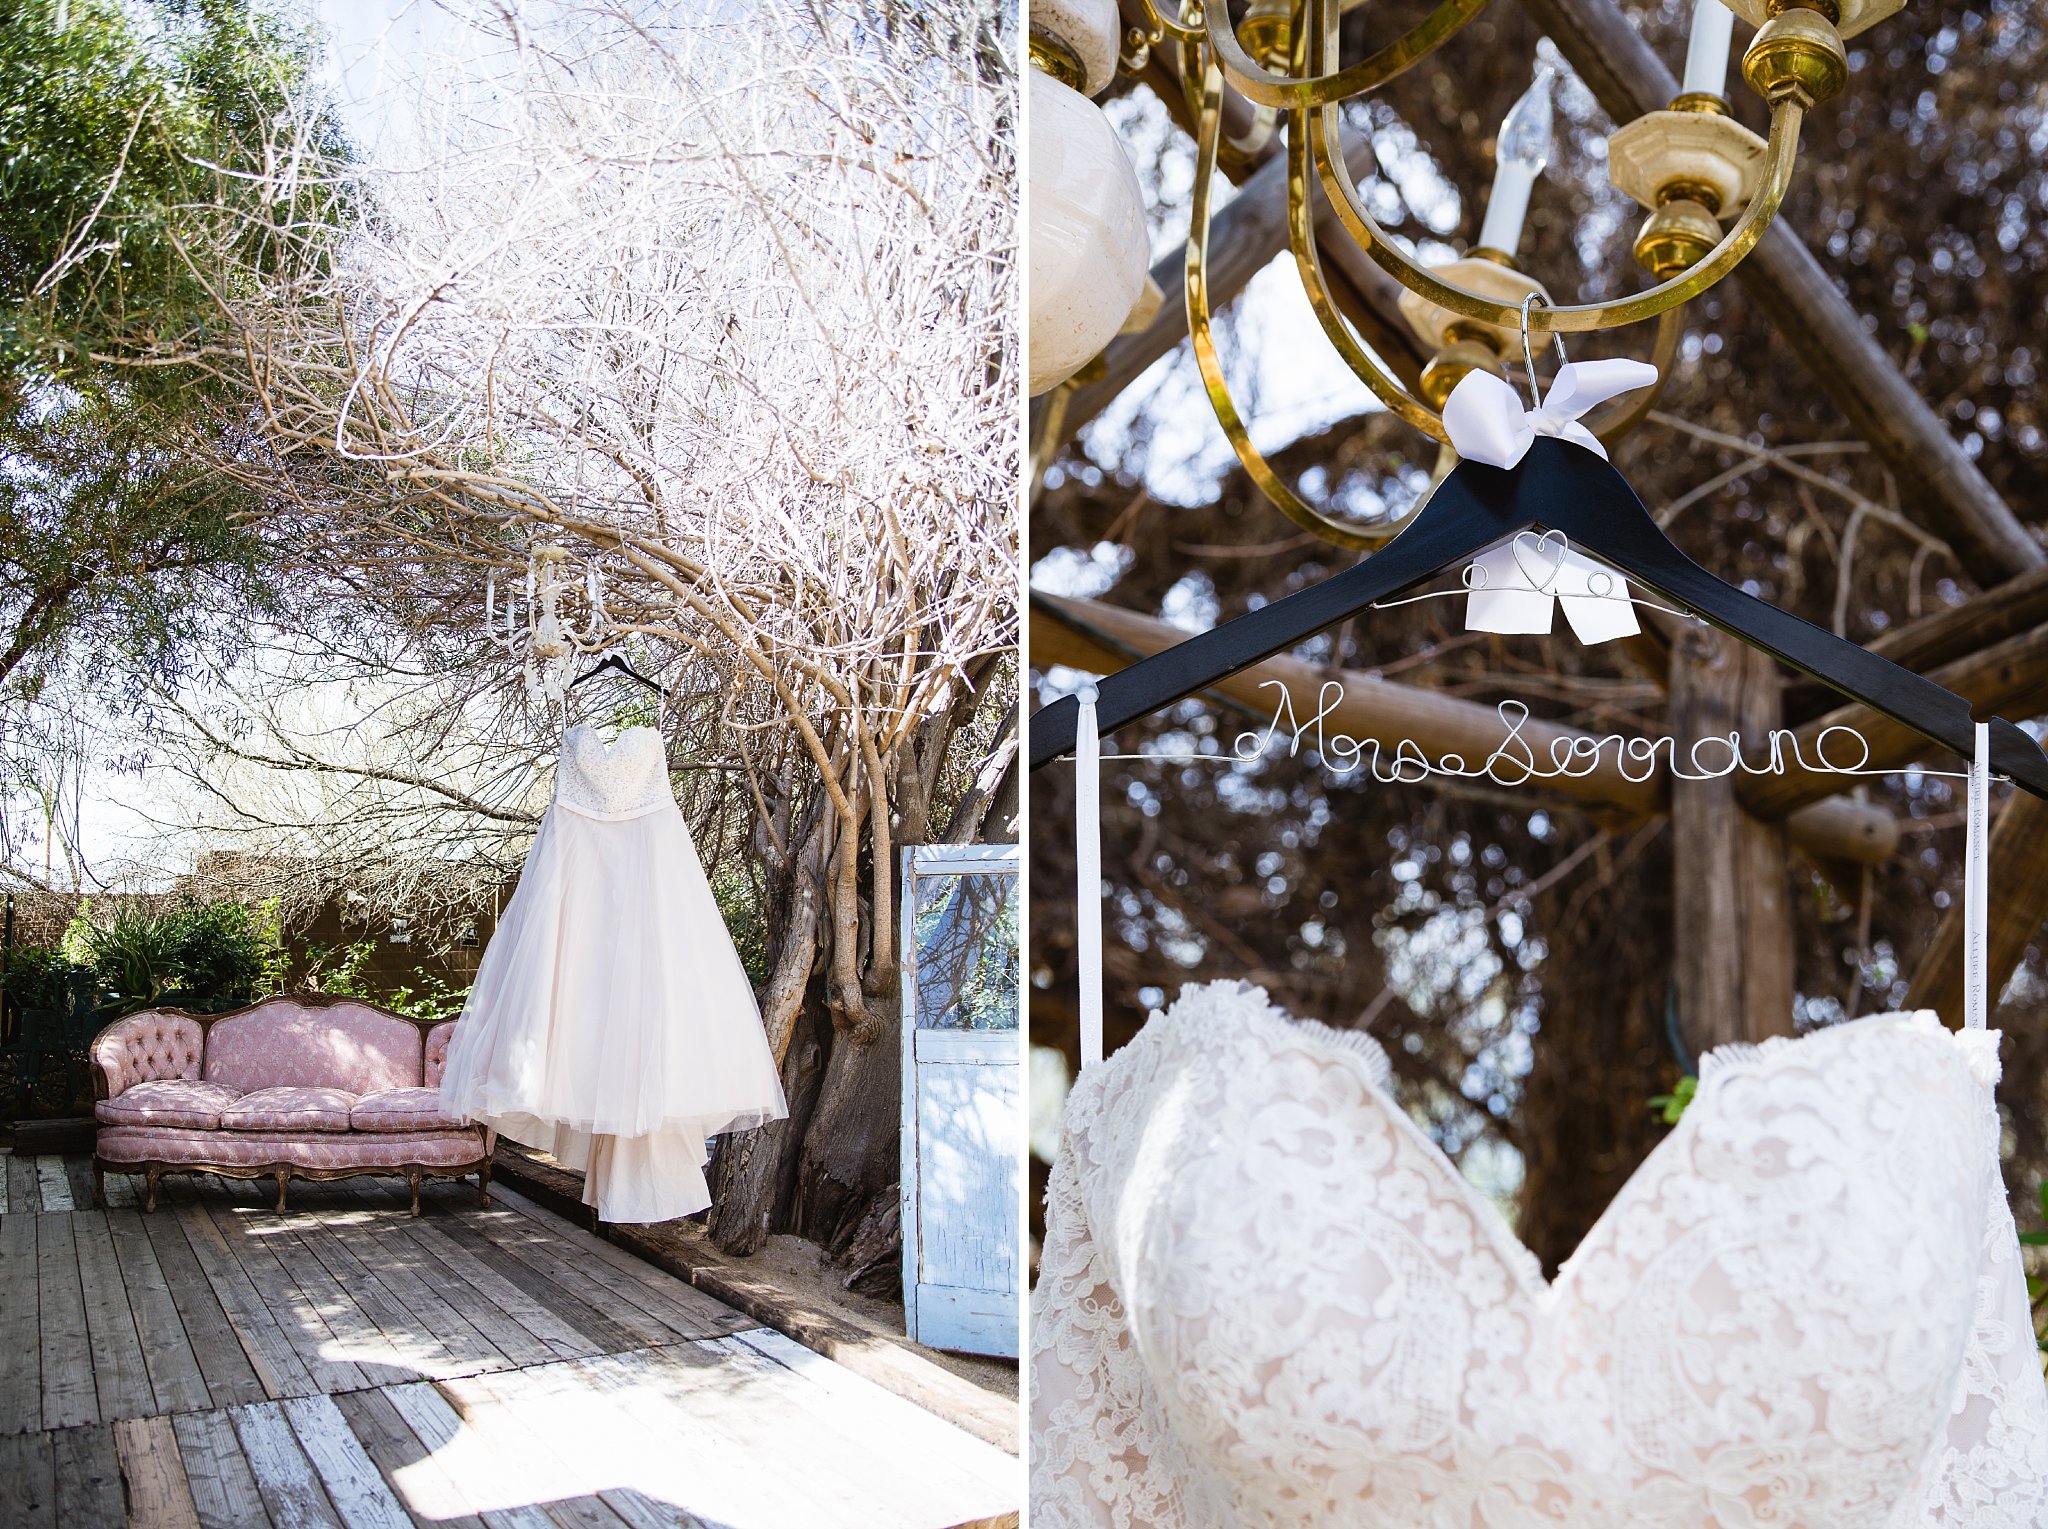 Victoria & Alex's Rustic Wedding at Whispering Tree Ranch